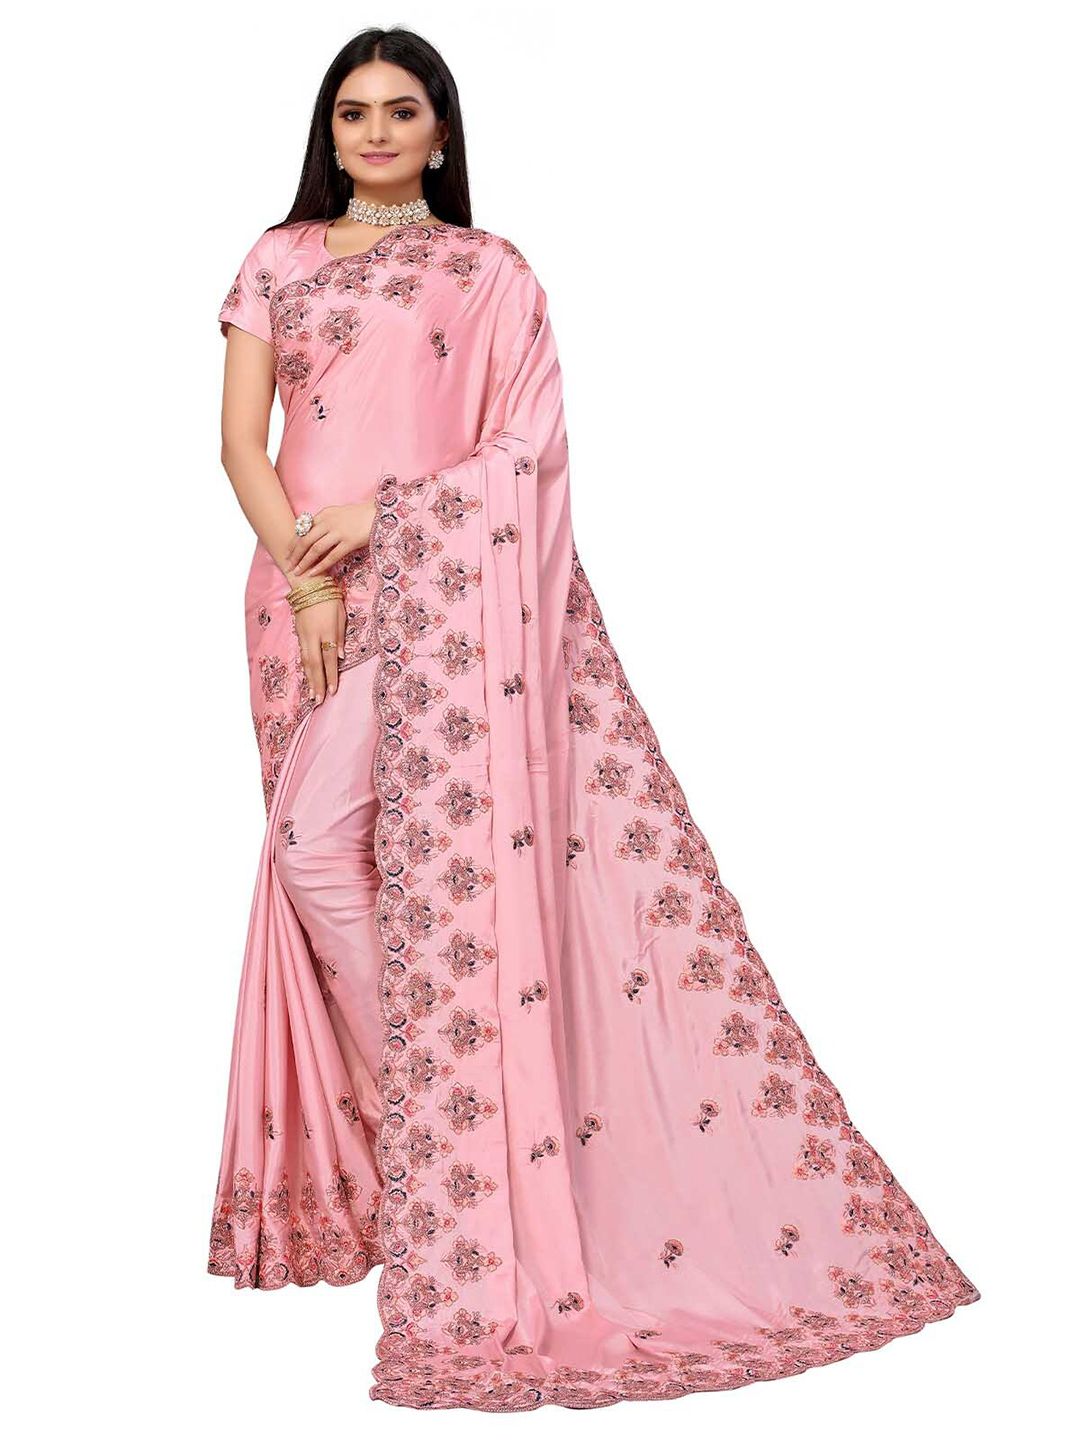 ODETTE Pink & Blue Floral Embroidered Saree Price in India